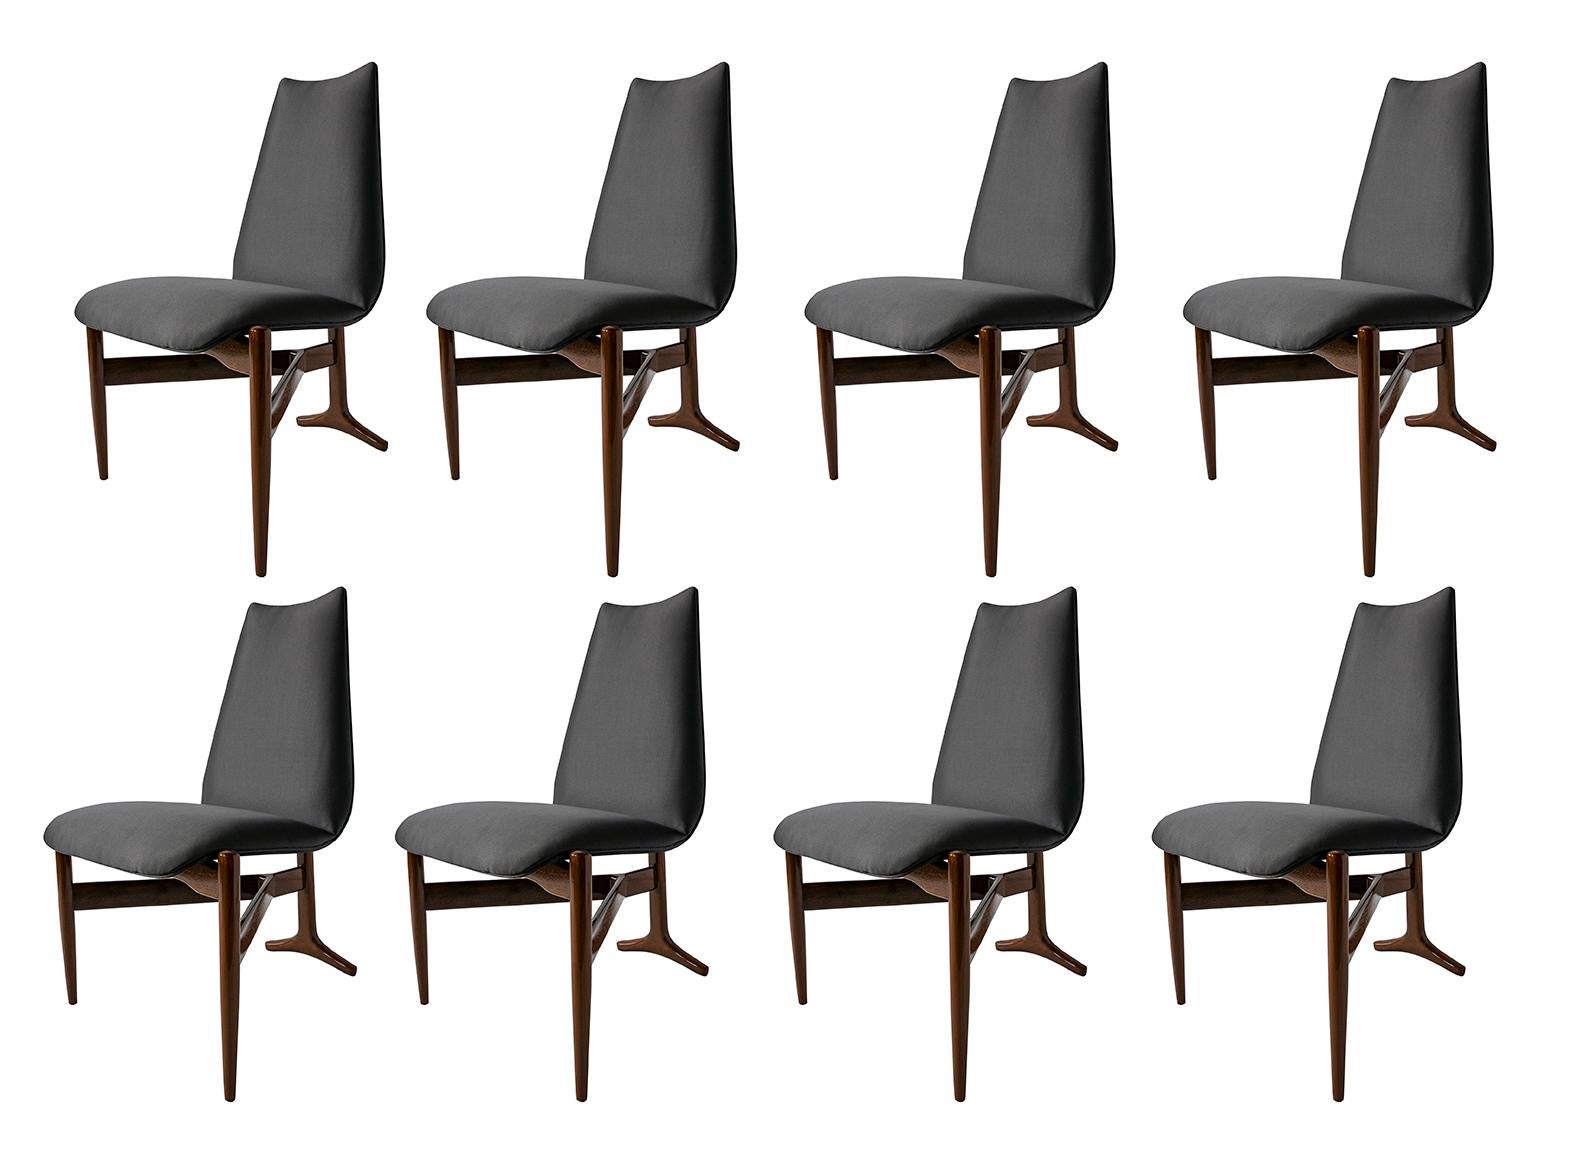 A unique set of 14 (Fourteen) Italian Modern chairs by Giuseppe Scapinelli. 3 legged chairs that are triangular in shape. The seat and back are upholstered and appear to be floating, over a Y-shaped wooden base. The rear leg, which extends along the